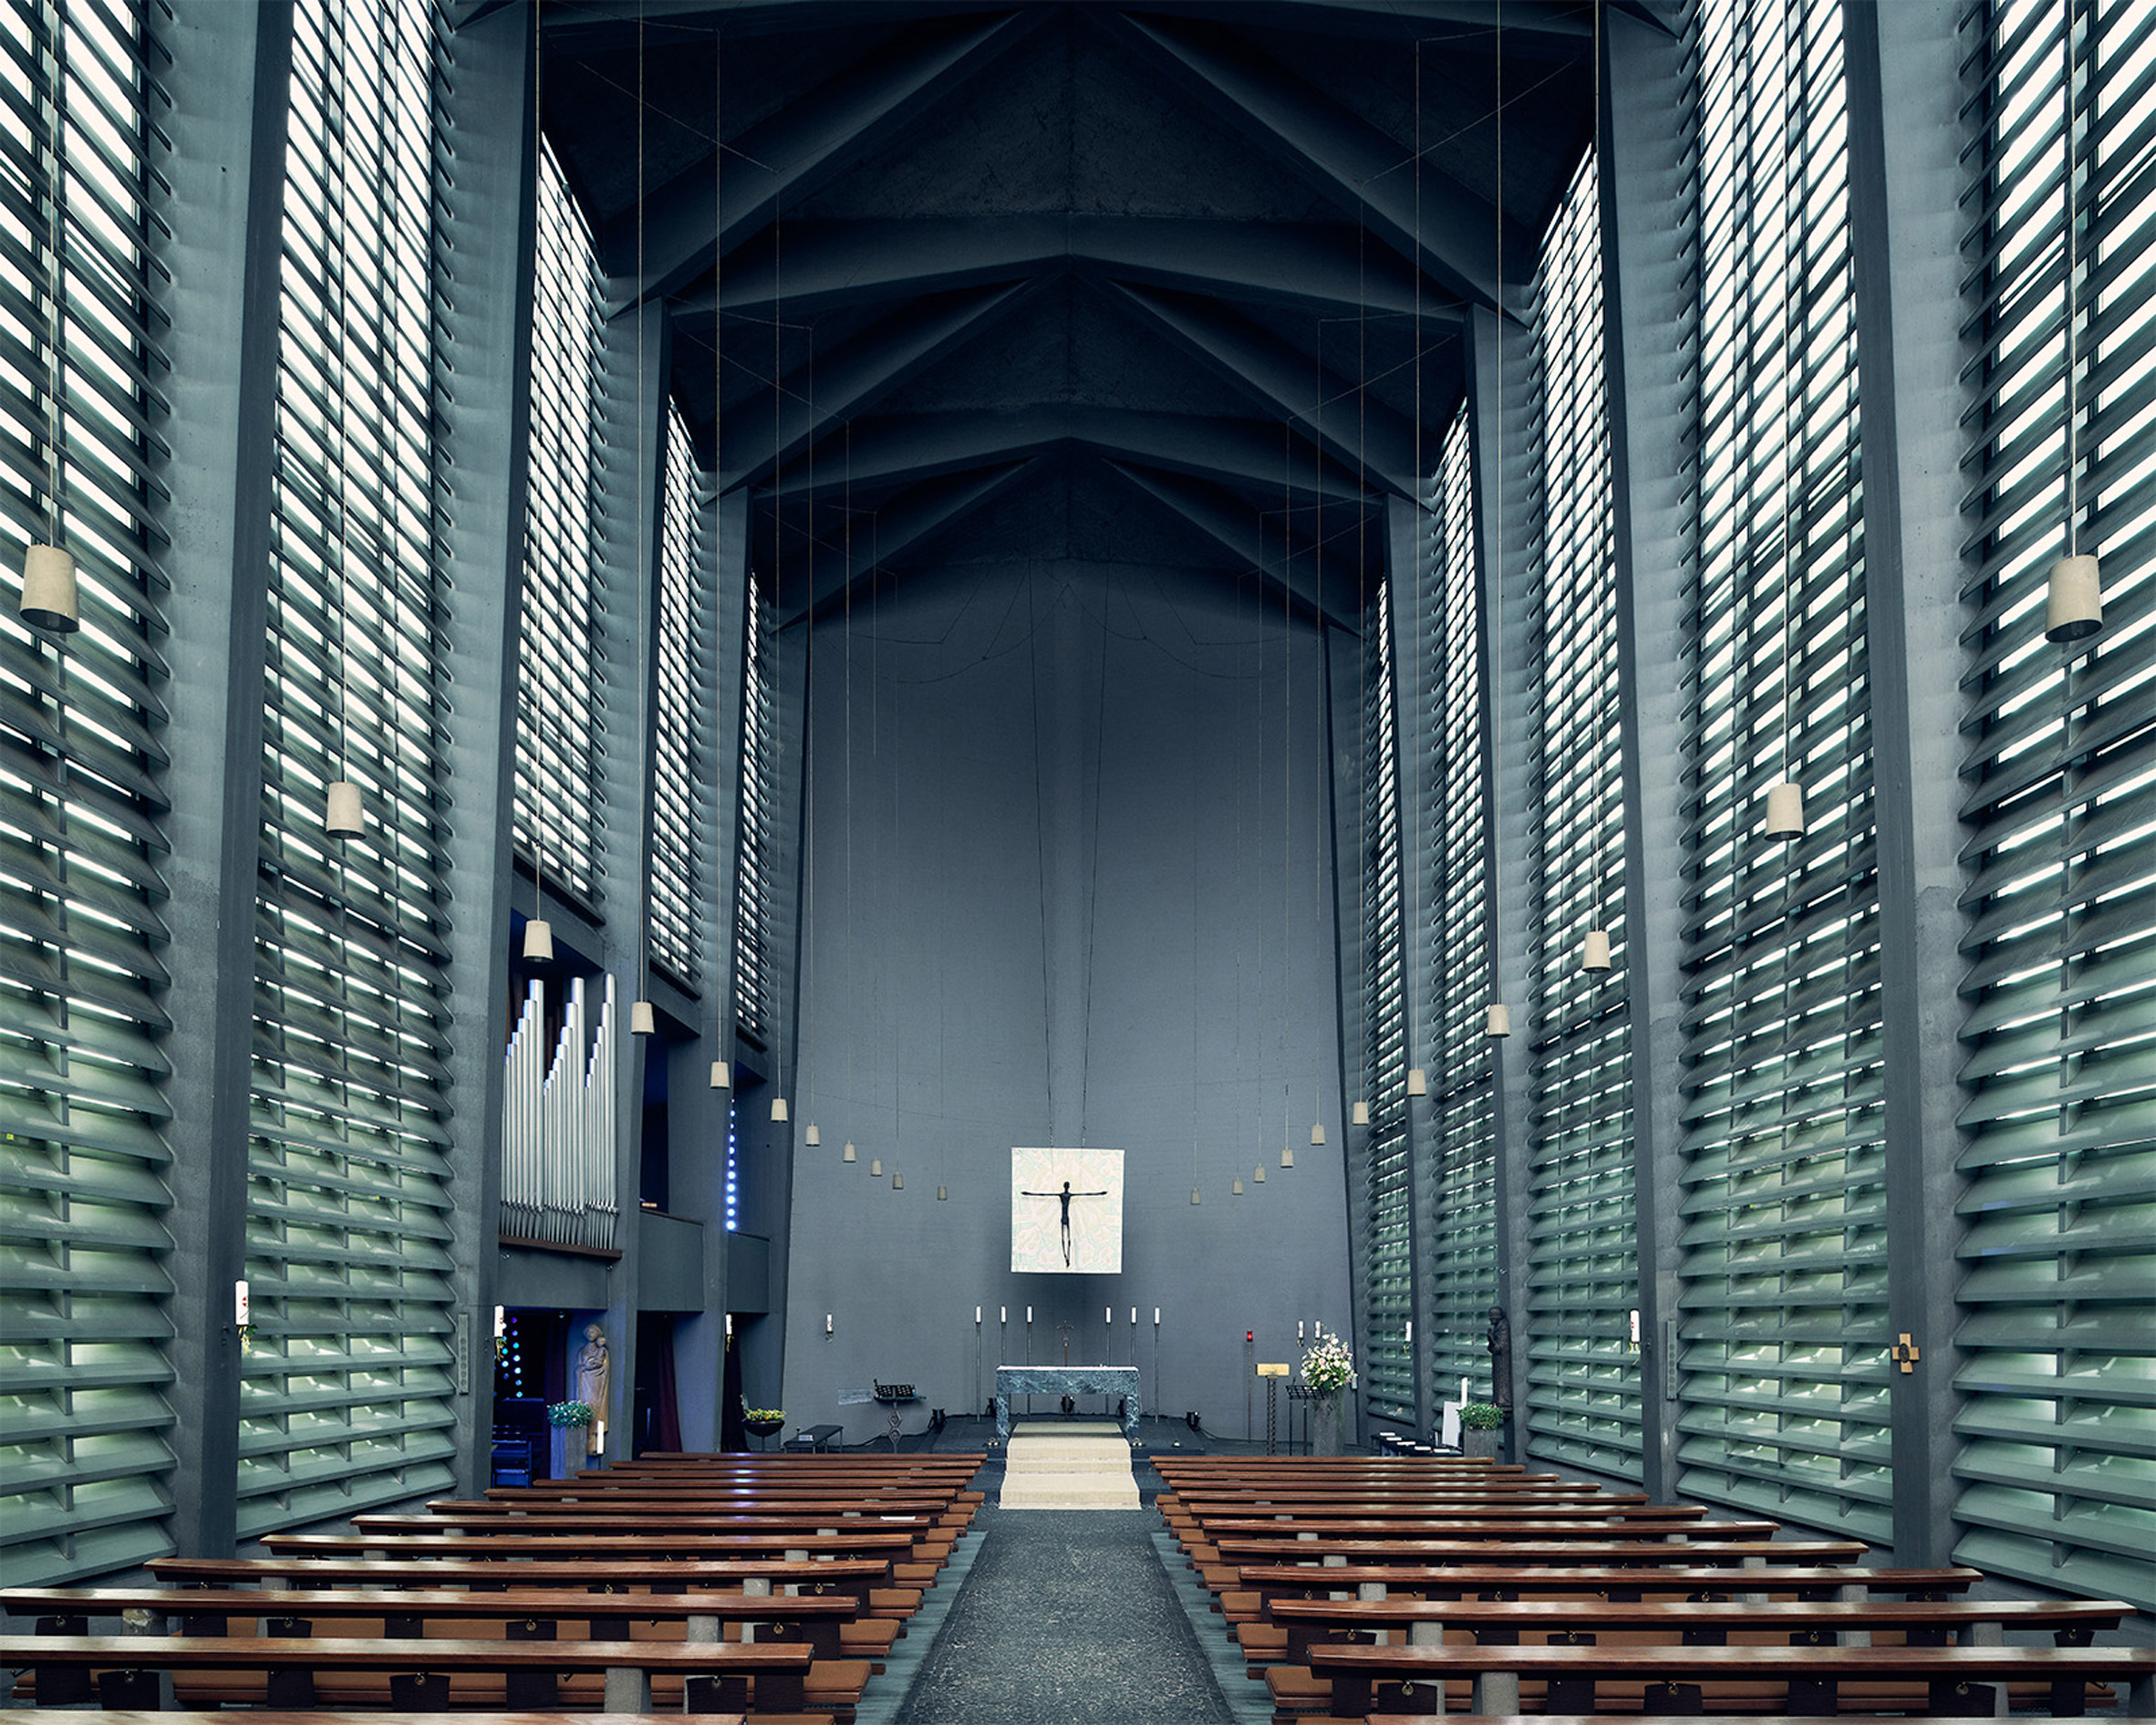 St. Reinold Kirche church featured in the Sacred Modernity book